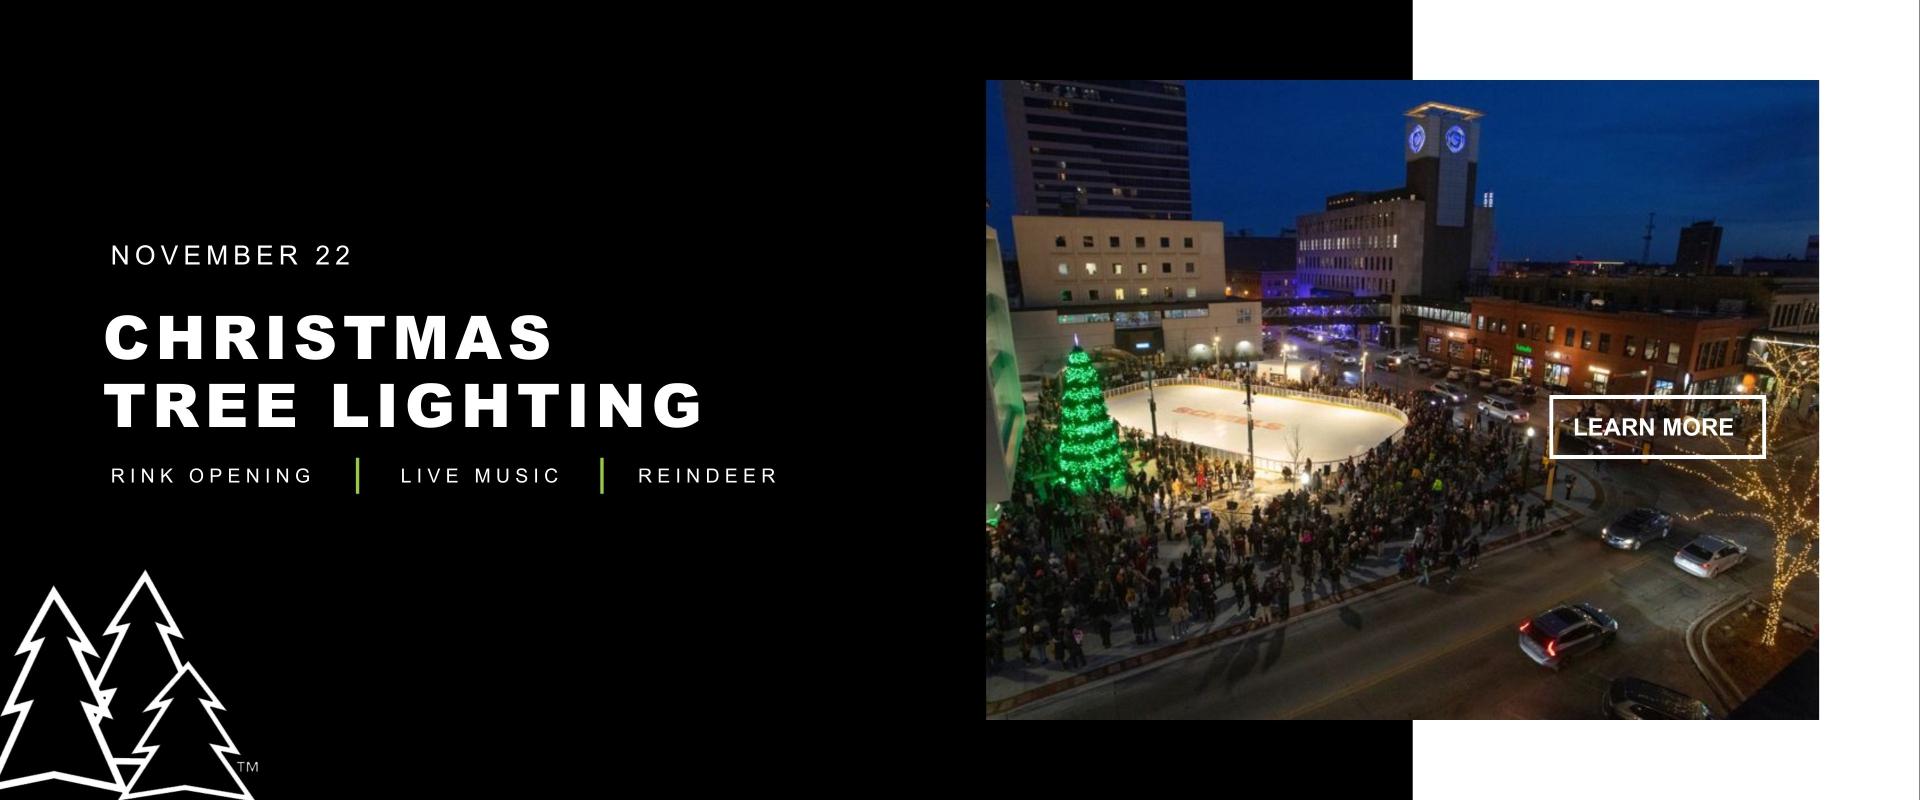 Graphic shows a photo of tree lighting with info and learn more